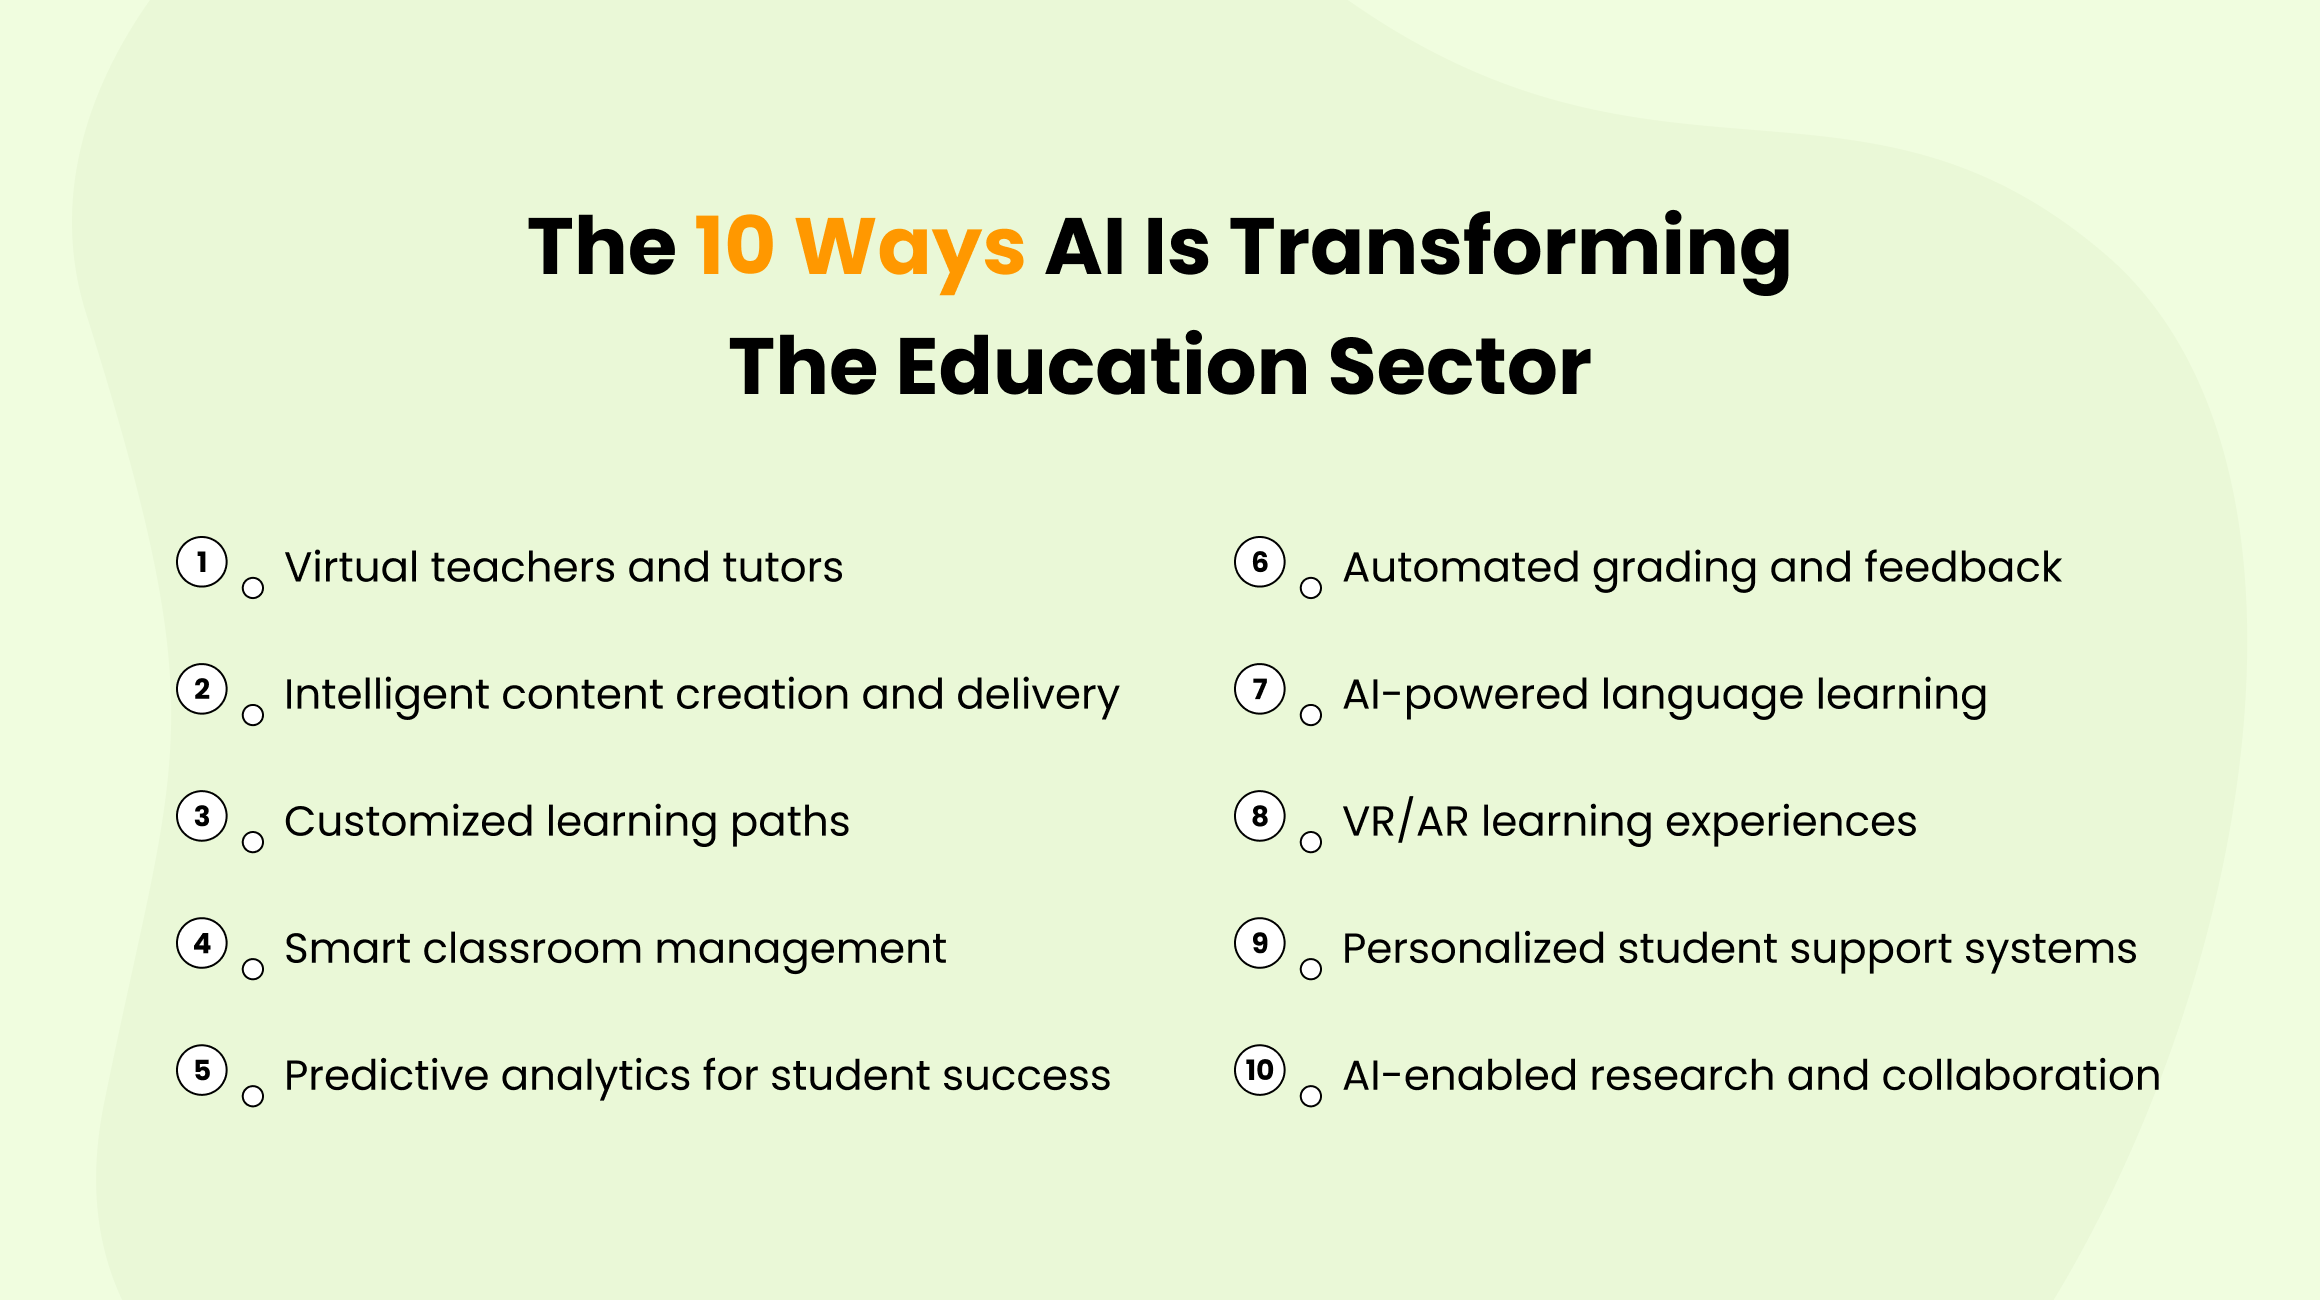 The 10 Ways AI Is Transforming The Education